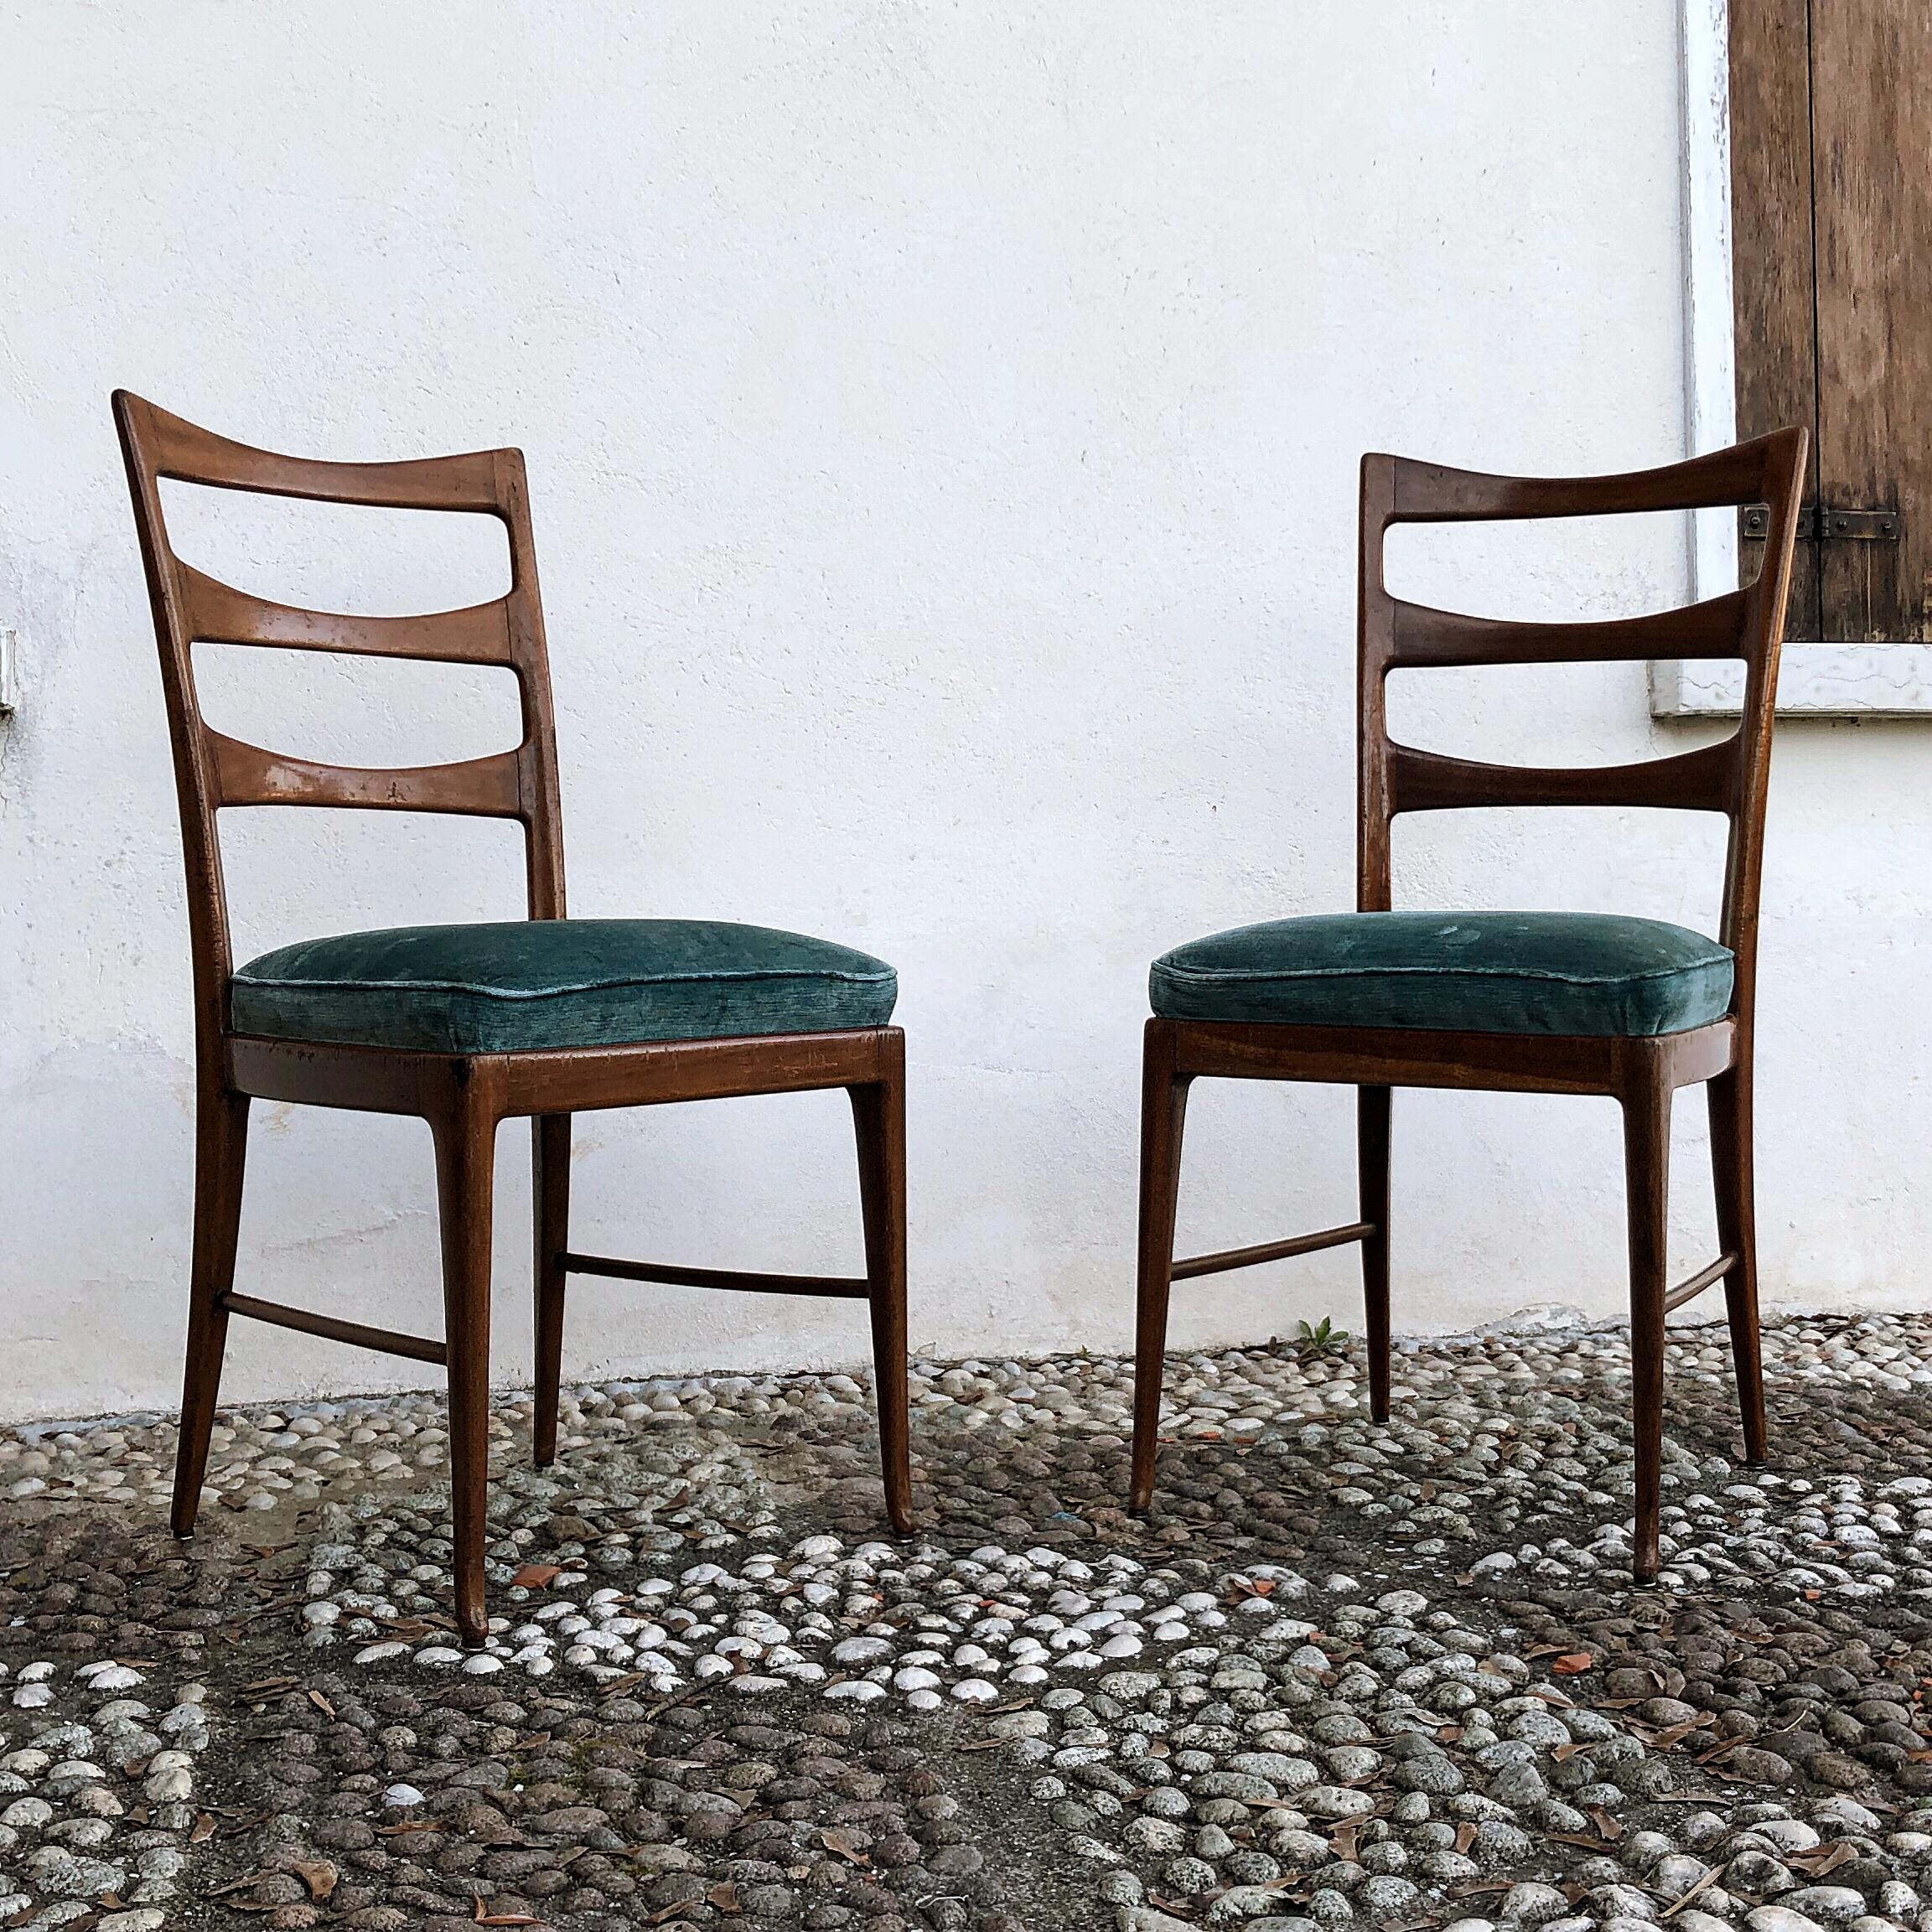 Paolo Buffa Midcentury Walnut and Emerald Velvet Dining Chairs, 1948, Set of 4 For Sale 3